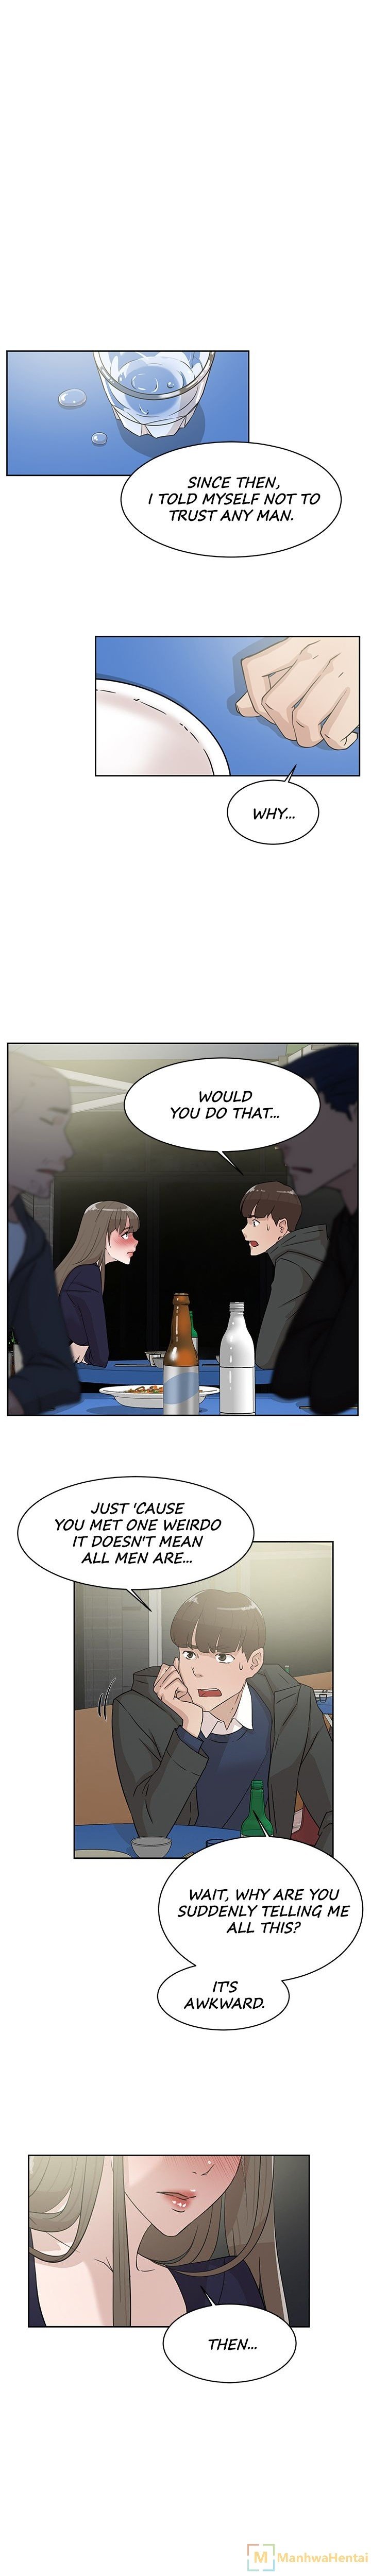 office-affairs-chap-31-4